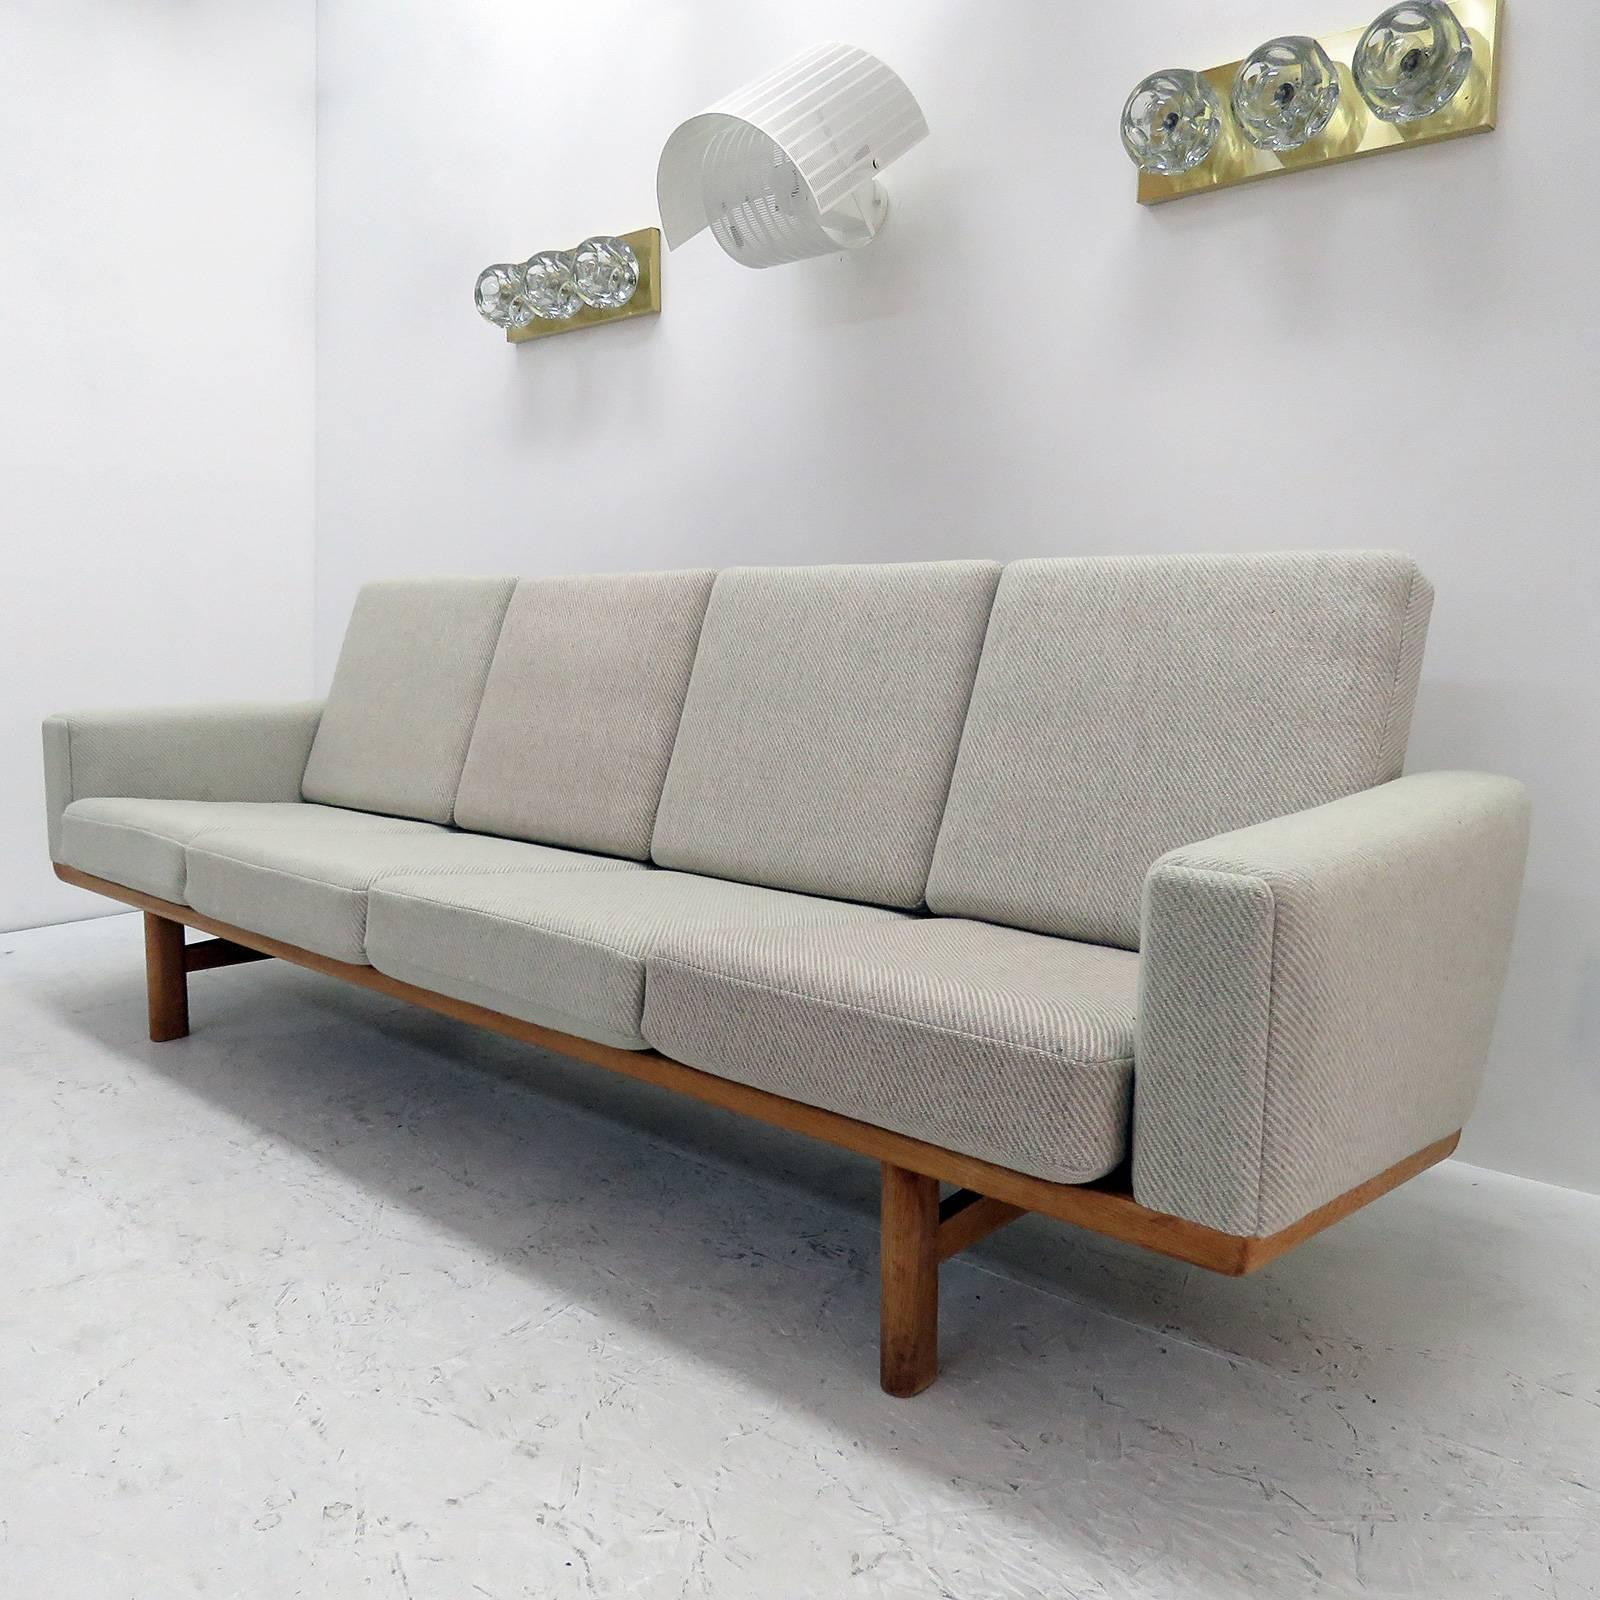 vintage 1950s Danish four-seat sofa, model GE236/4 designed by Hans J. Wegner for GETAMA, solid oak frame with nice patina and original cushions later reupholstered with light wool fabric, marked.